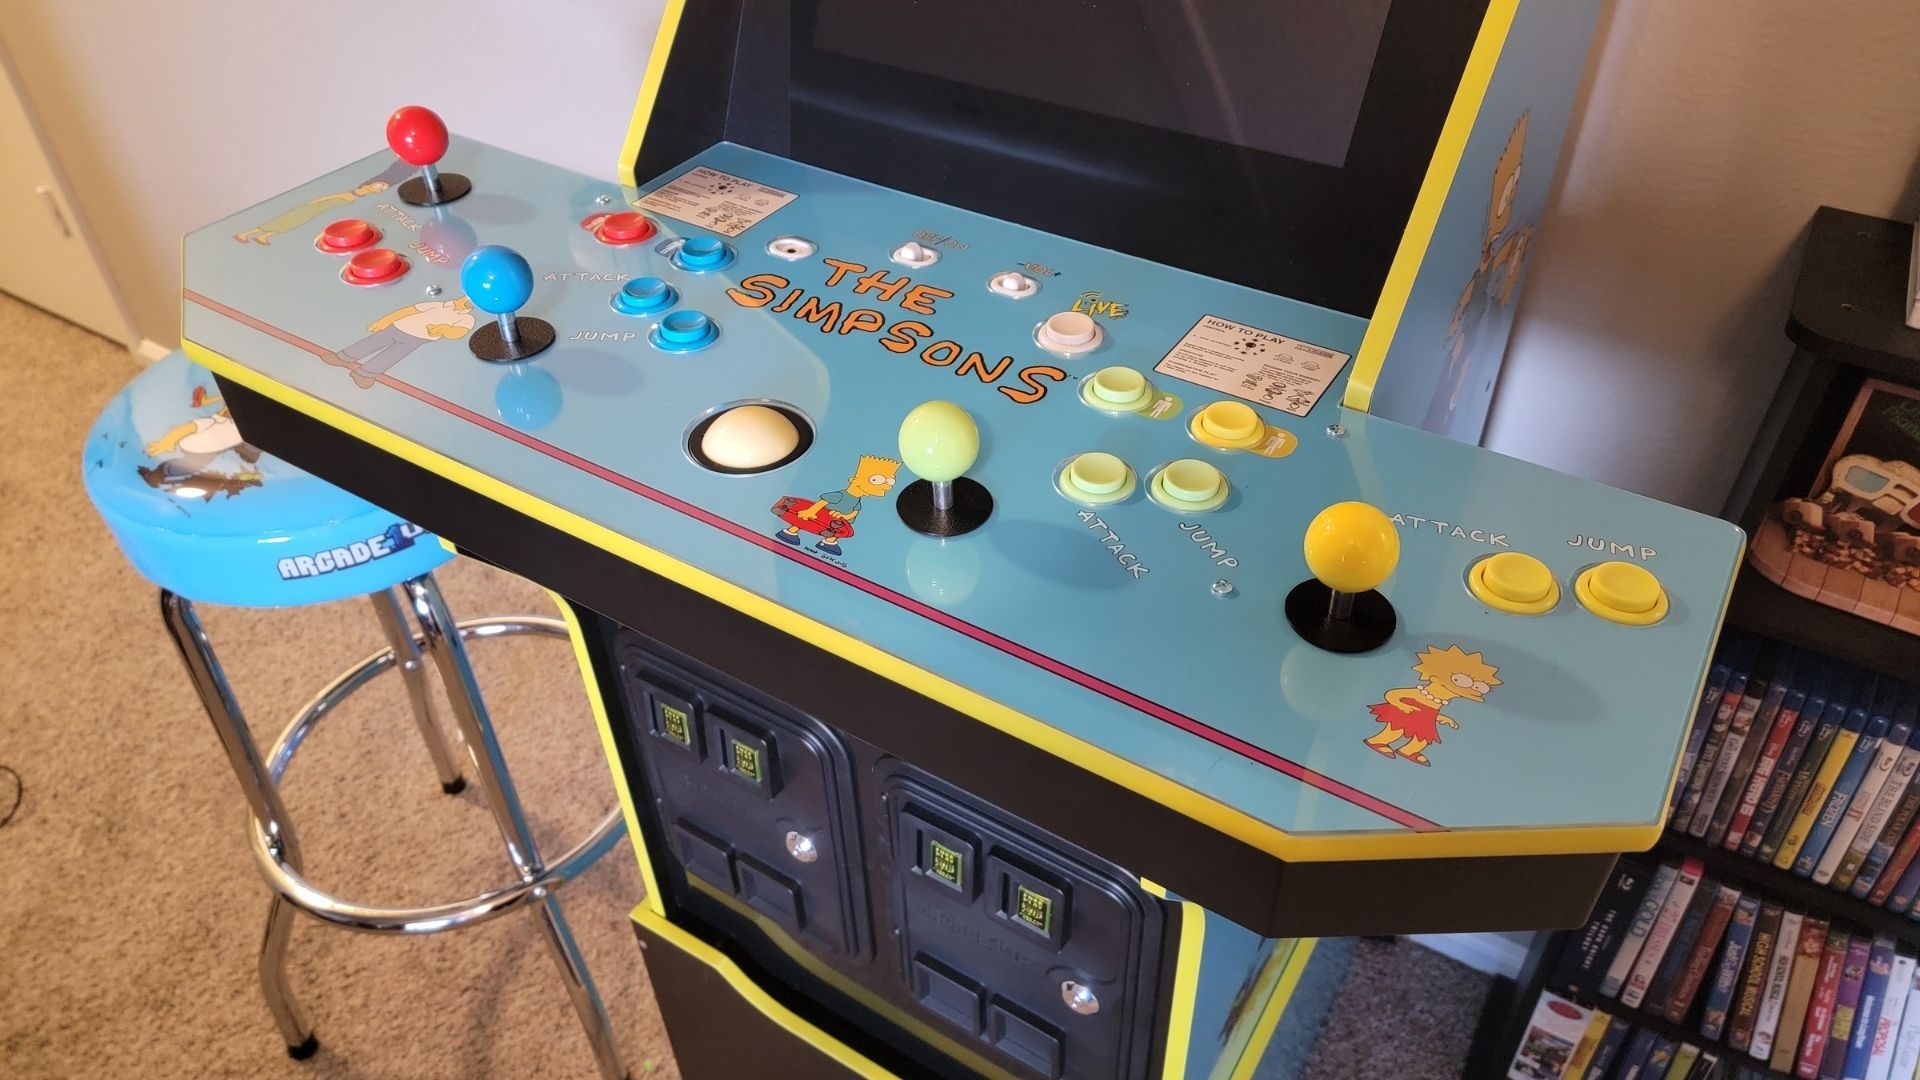 How I Hacked the Arcade1Up Simpsons Machine (Softmod) to Play